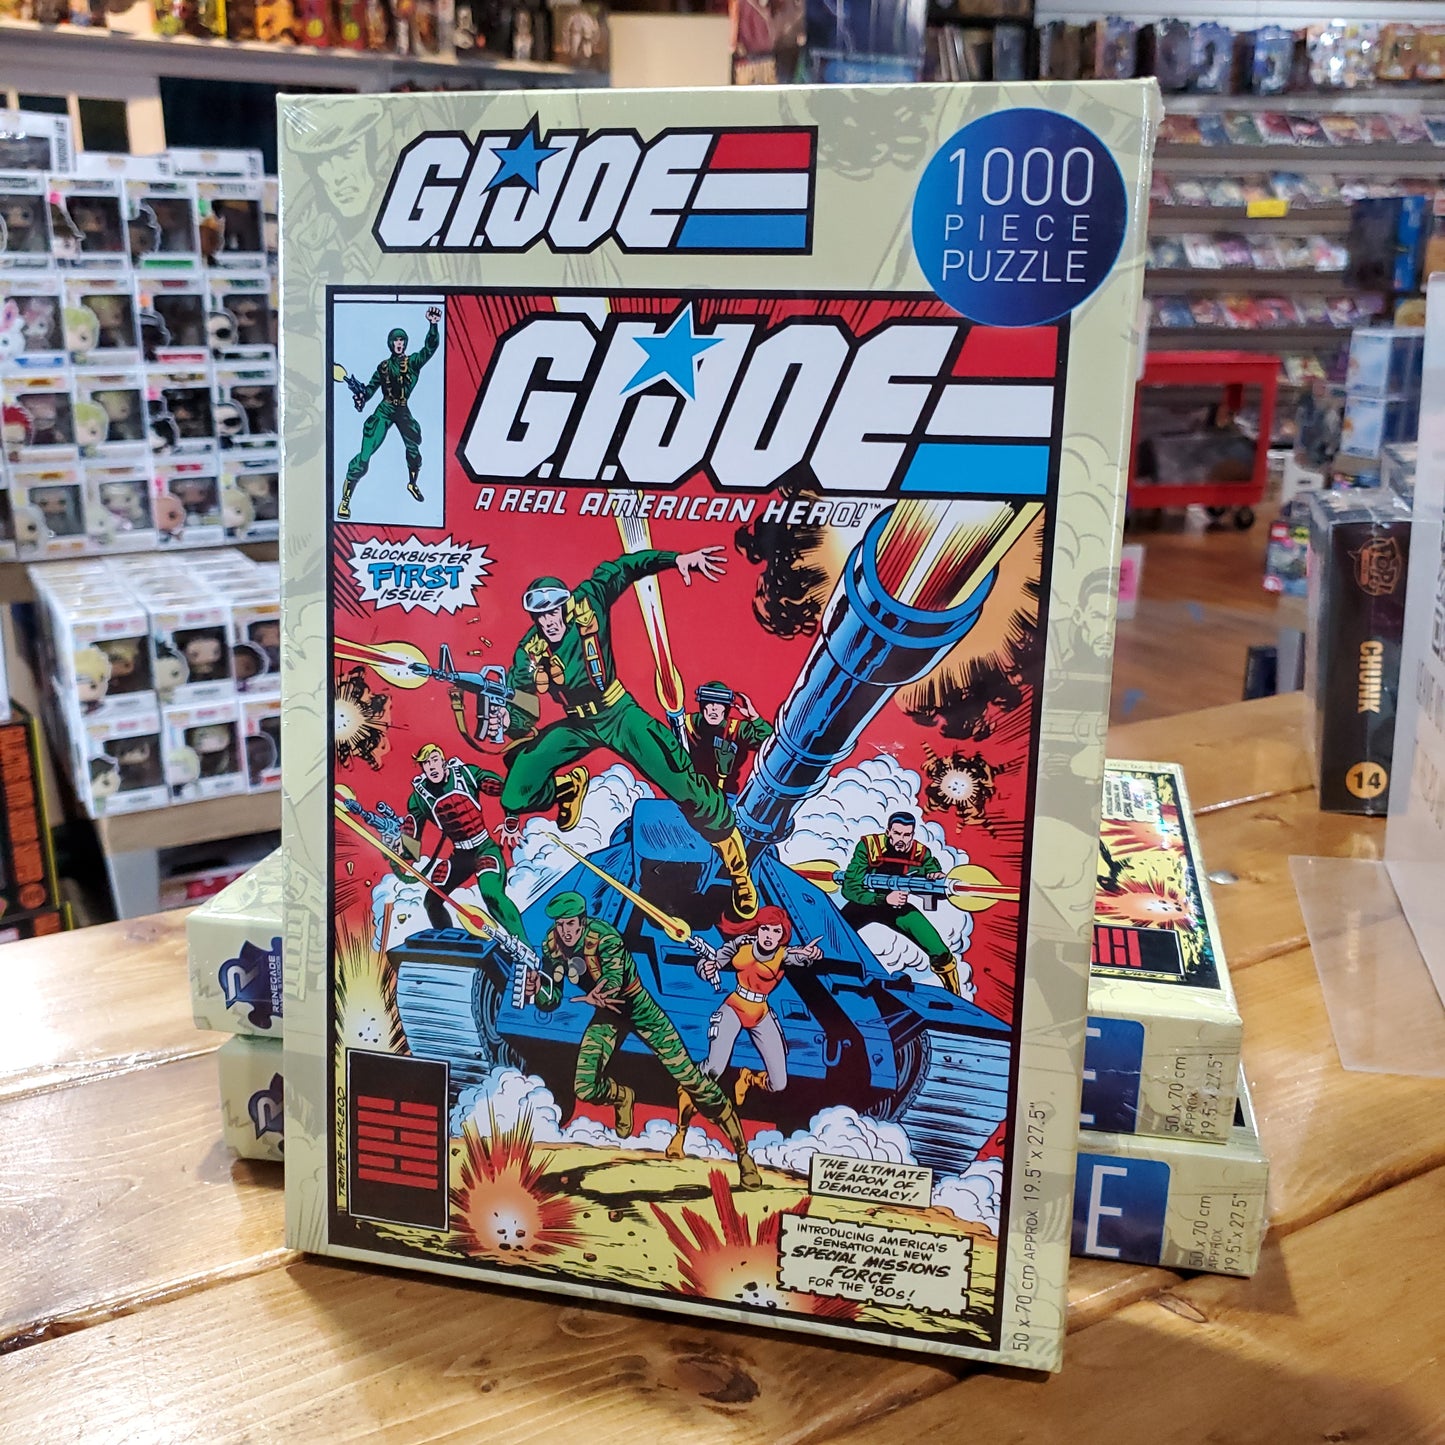 GI Joe - First Comic Issue - 1000pc PUZZLE